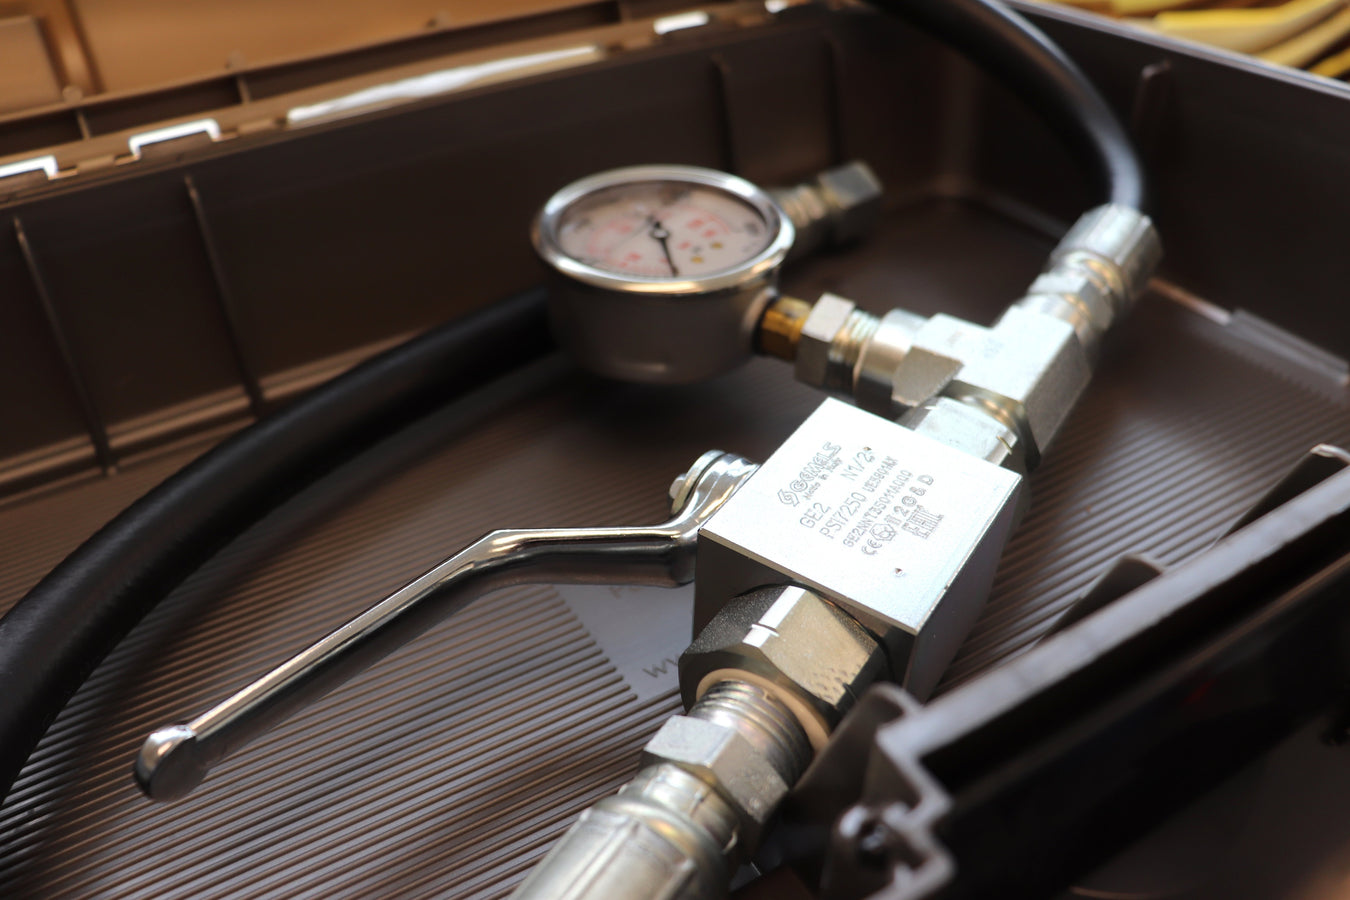 Hoses and Fitting - Image of pressure gauge